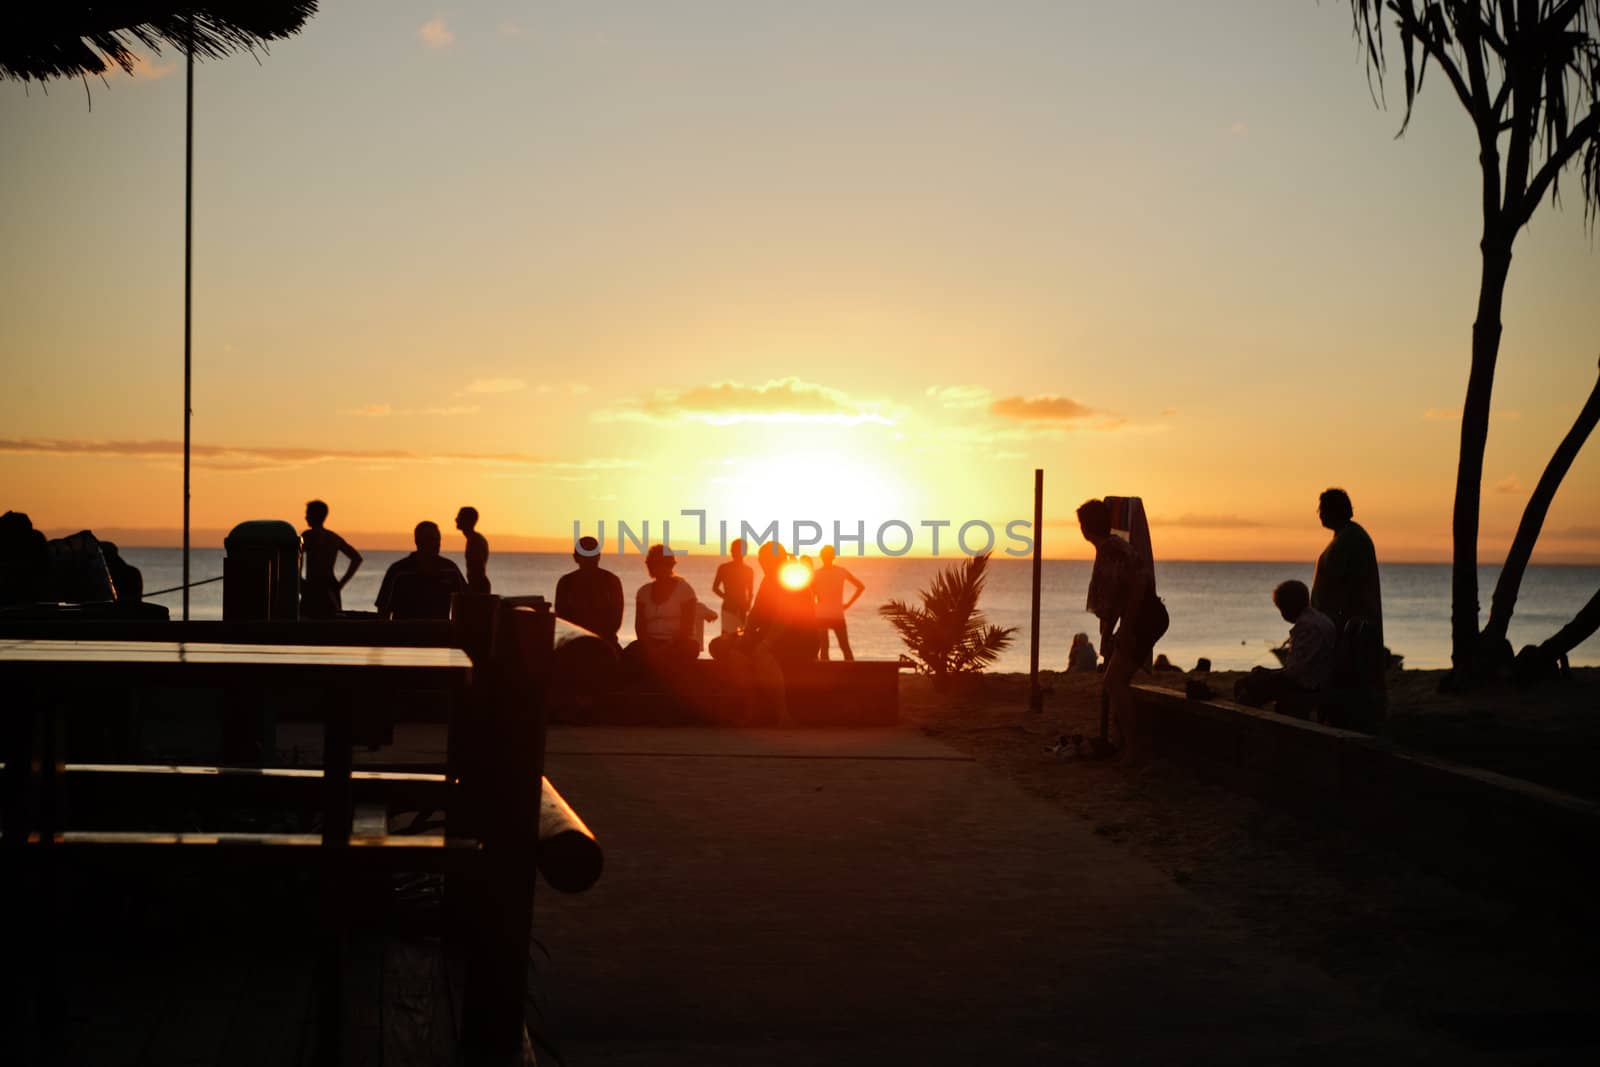 People on a tropical beach at sunset silhouetted against the orange glow of the setting sun as it drops below the horizon of the ocean